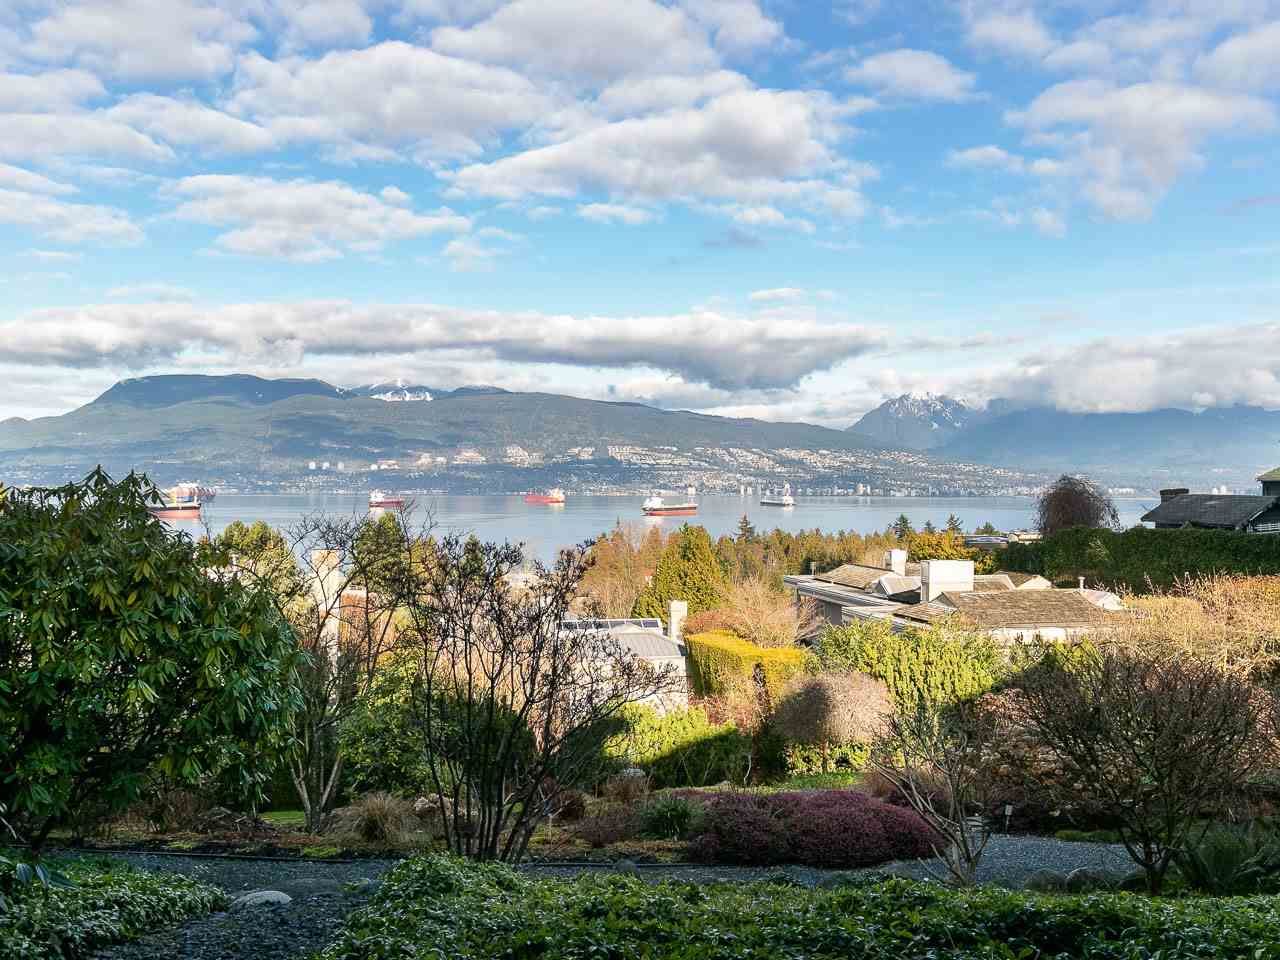 Main Photo: 2 1980 SASAMAT STREET in Vancouver: Point Grey Townhouse for sale (Vancouver West)  : MLS®# R2357115